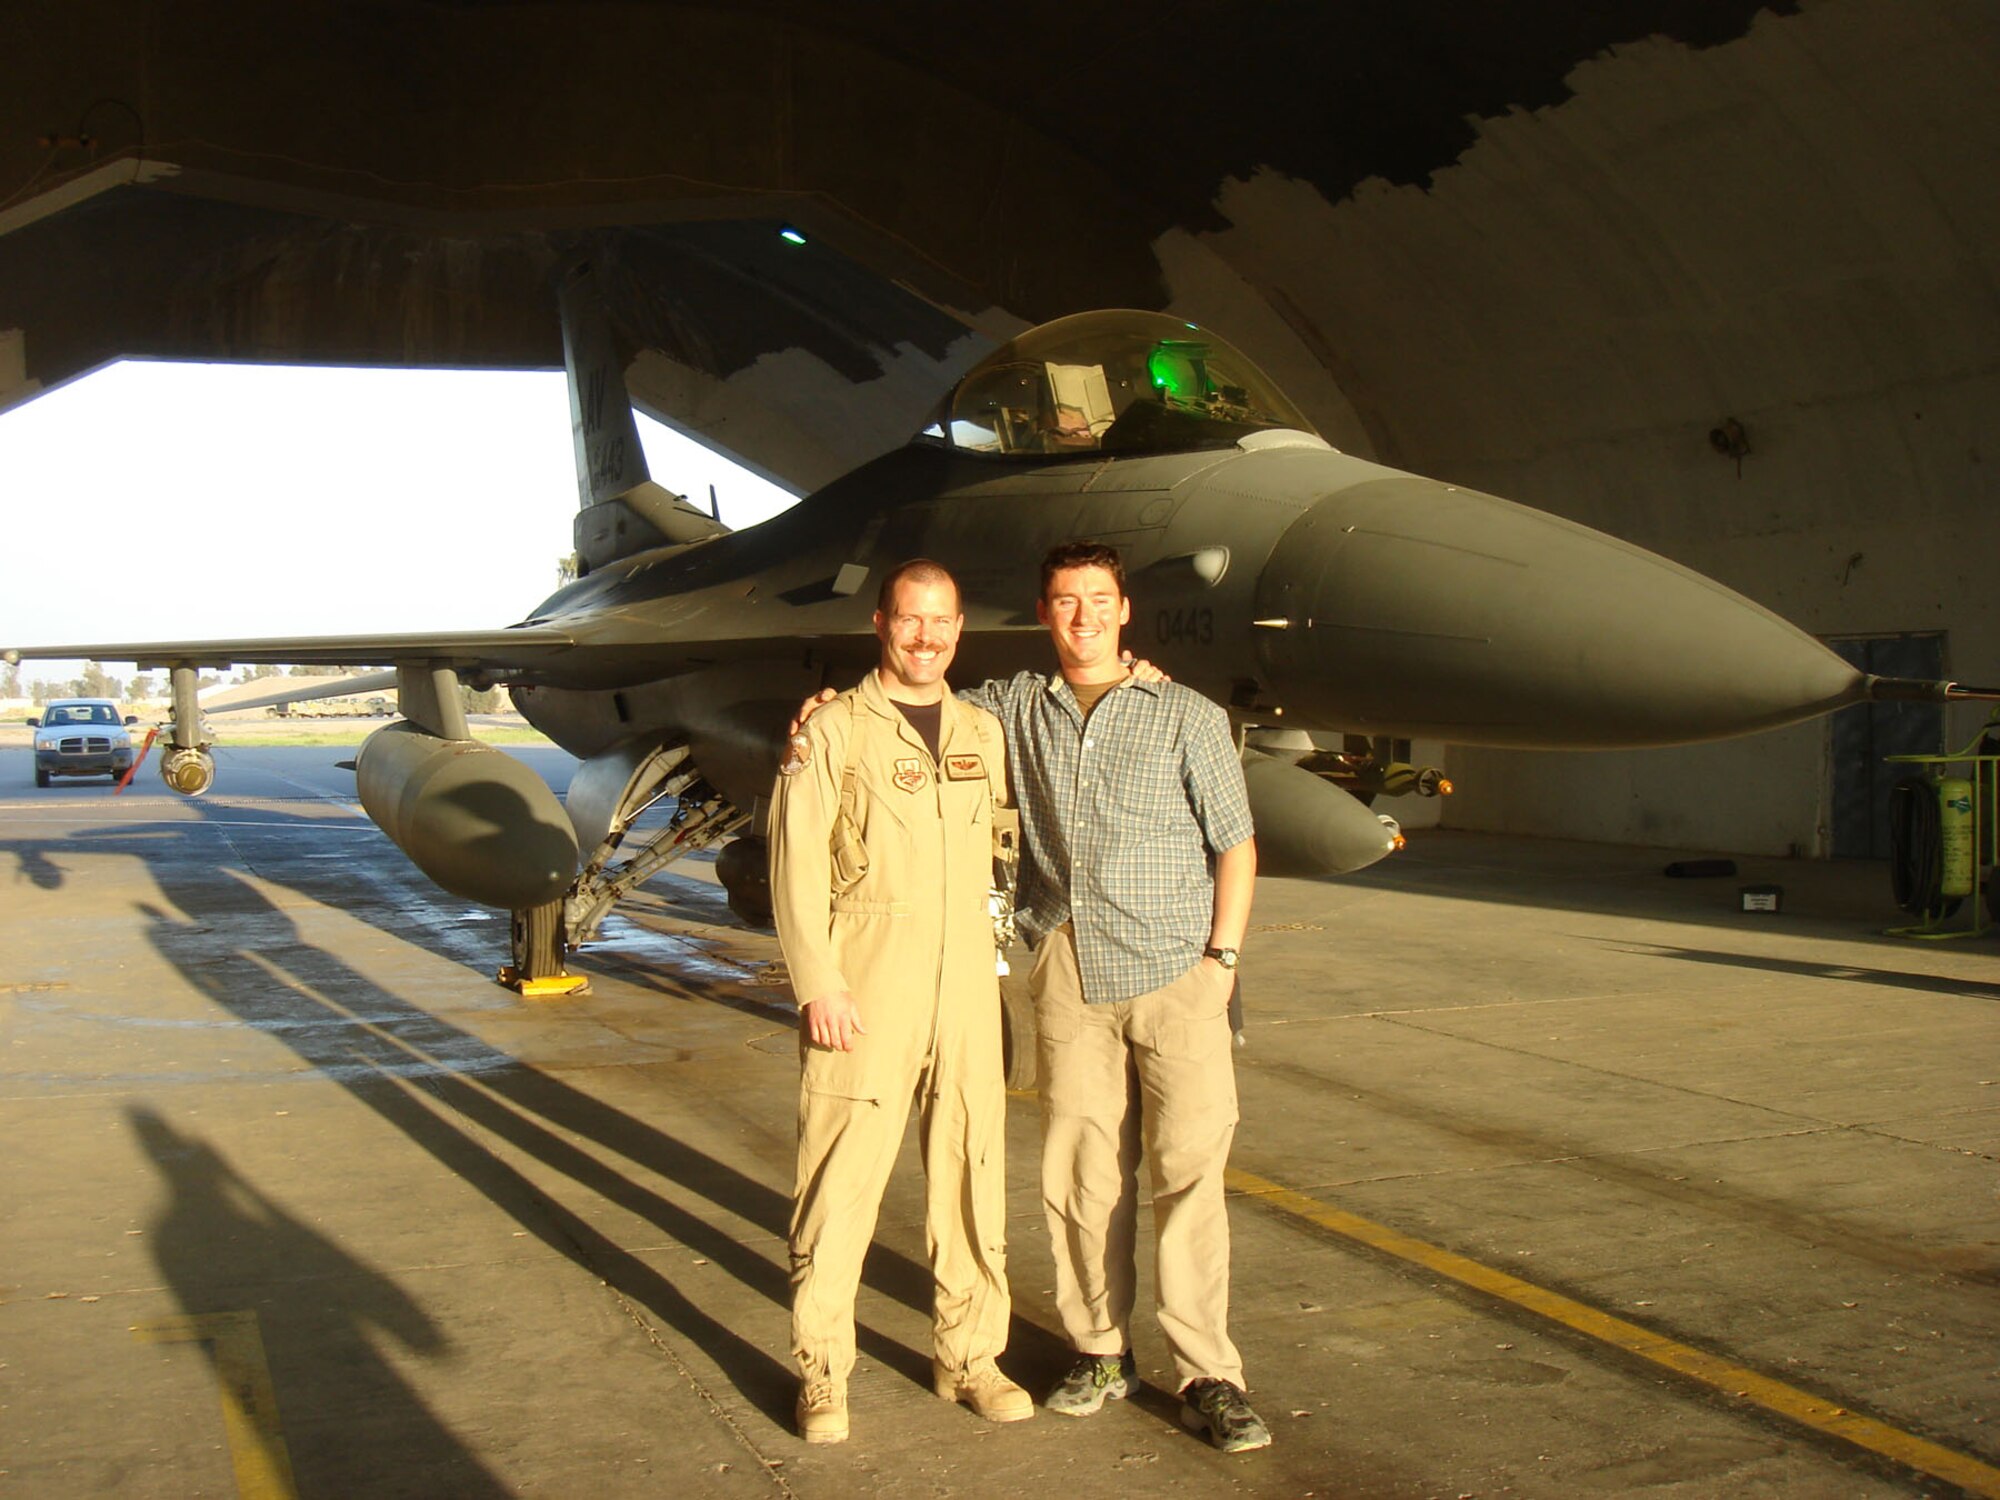 At the end of his tour in Iraq, Sgt Wallace (right) visited Maj Marquardt (left).  They are standing in front of the F-16 Marquardt flew that day.